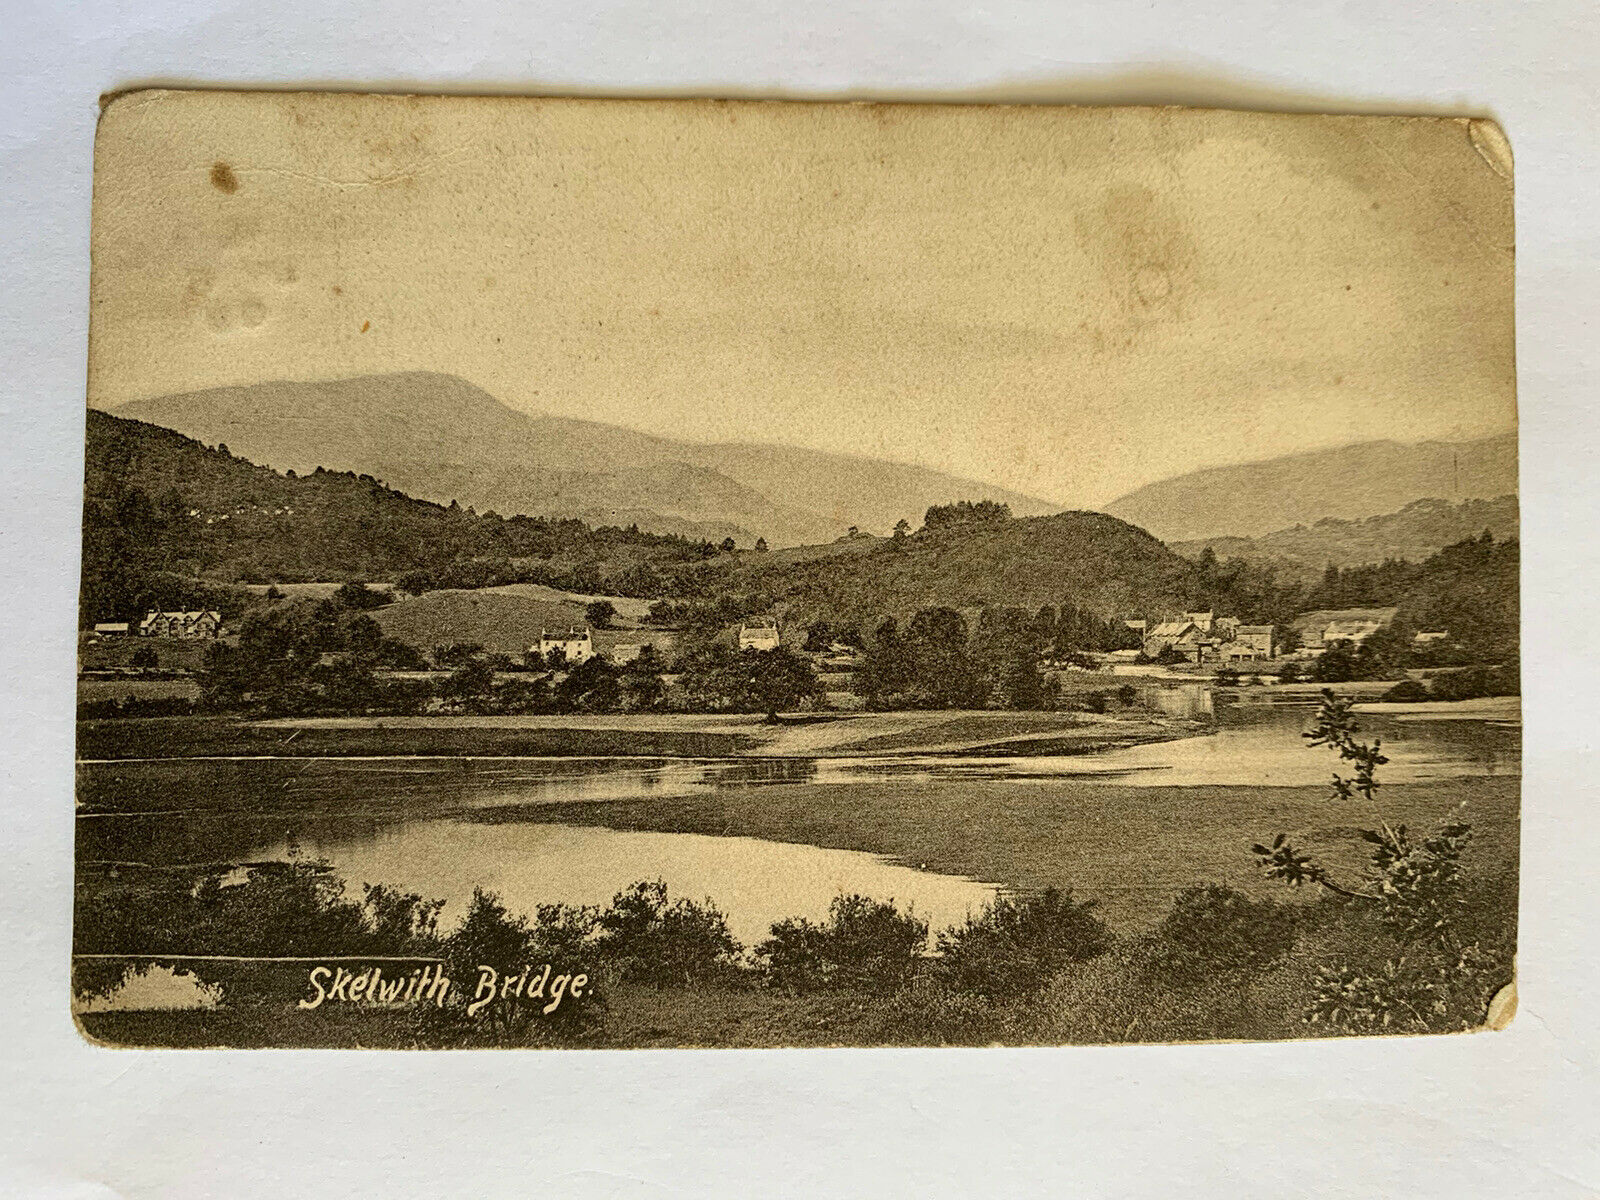 House Clearance - Vintage RPPC Service - SKELWITH BRIDGE - LAKE DISTRICT CUMBRIA ENGLAND